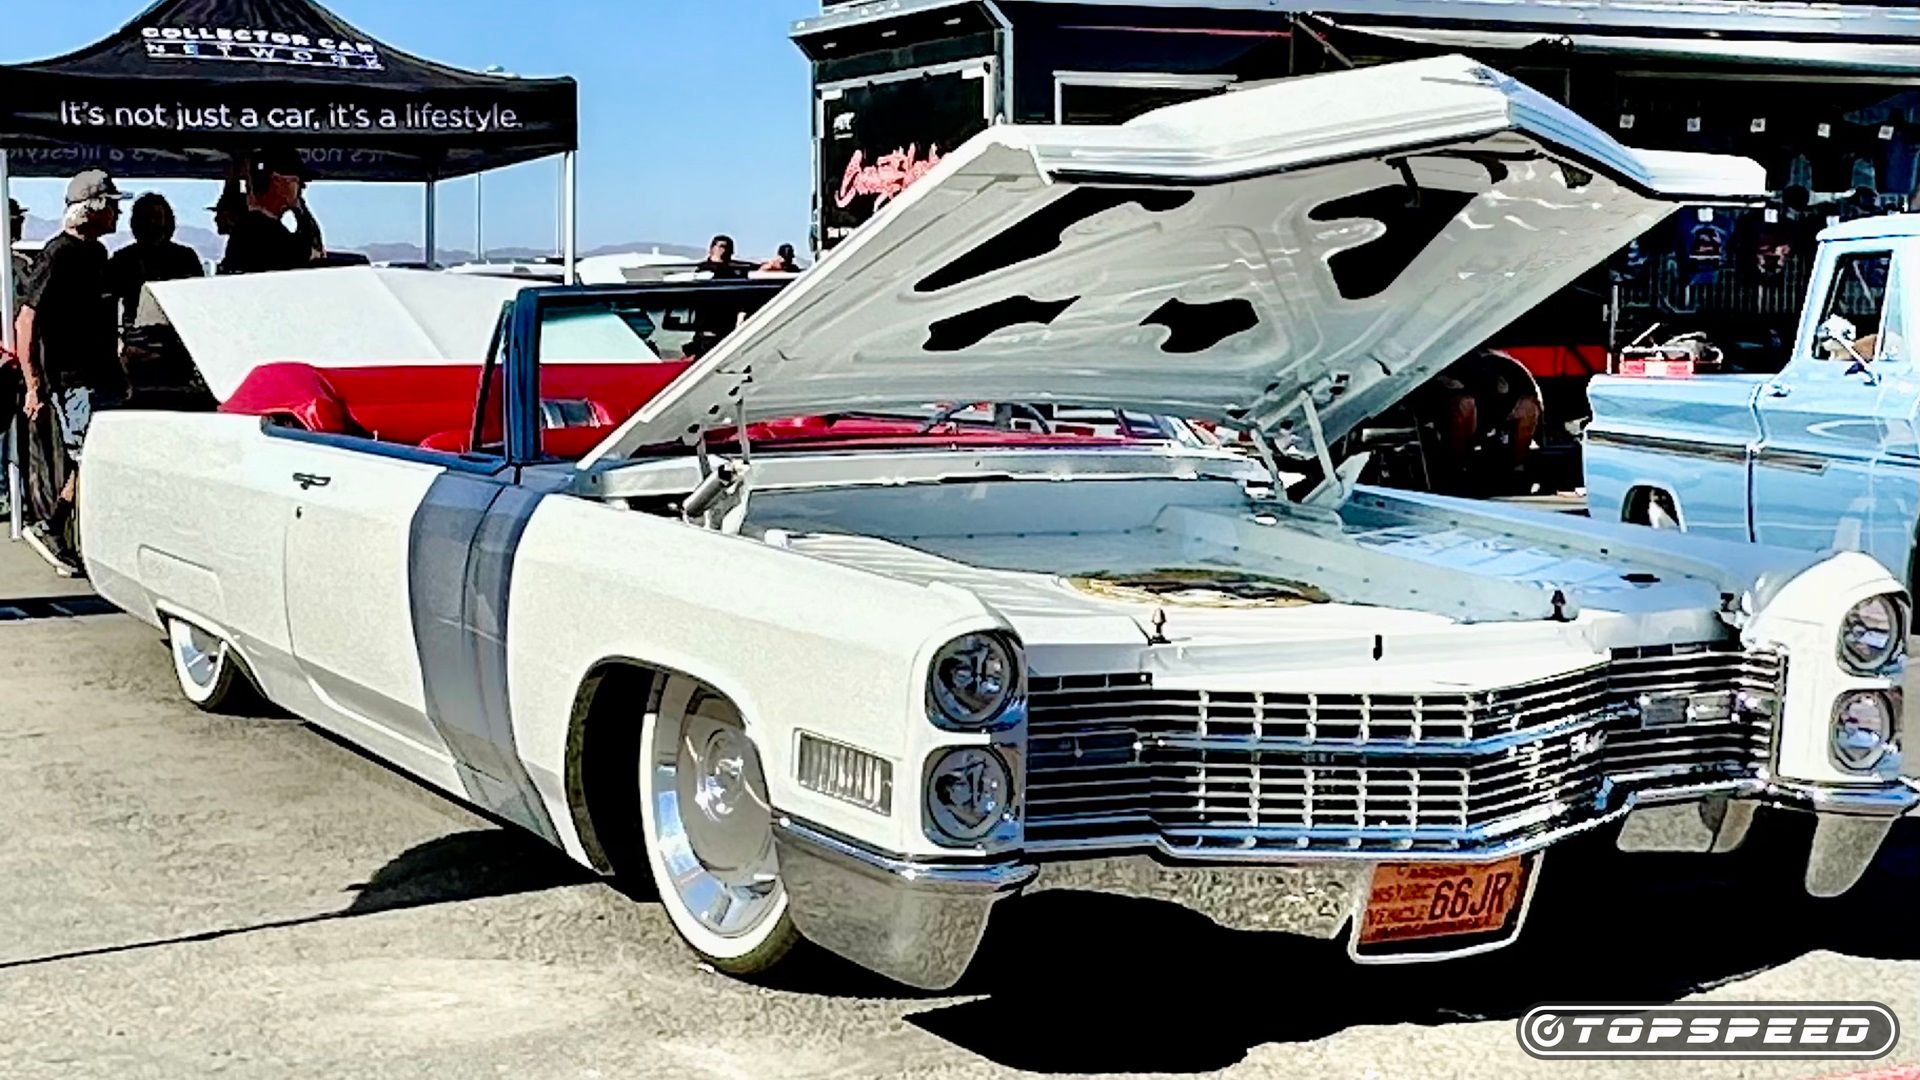 https://static1.topspeedimages.com/wordpress/wp-content/uploads/wm/2024/01/1966-ev-cadillac-deville-electro-mod-an-electric-swap-from-legacy-ev-by-jody-only-12.jpg